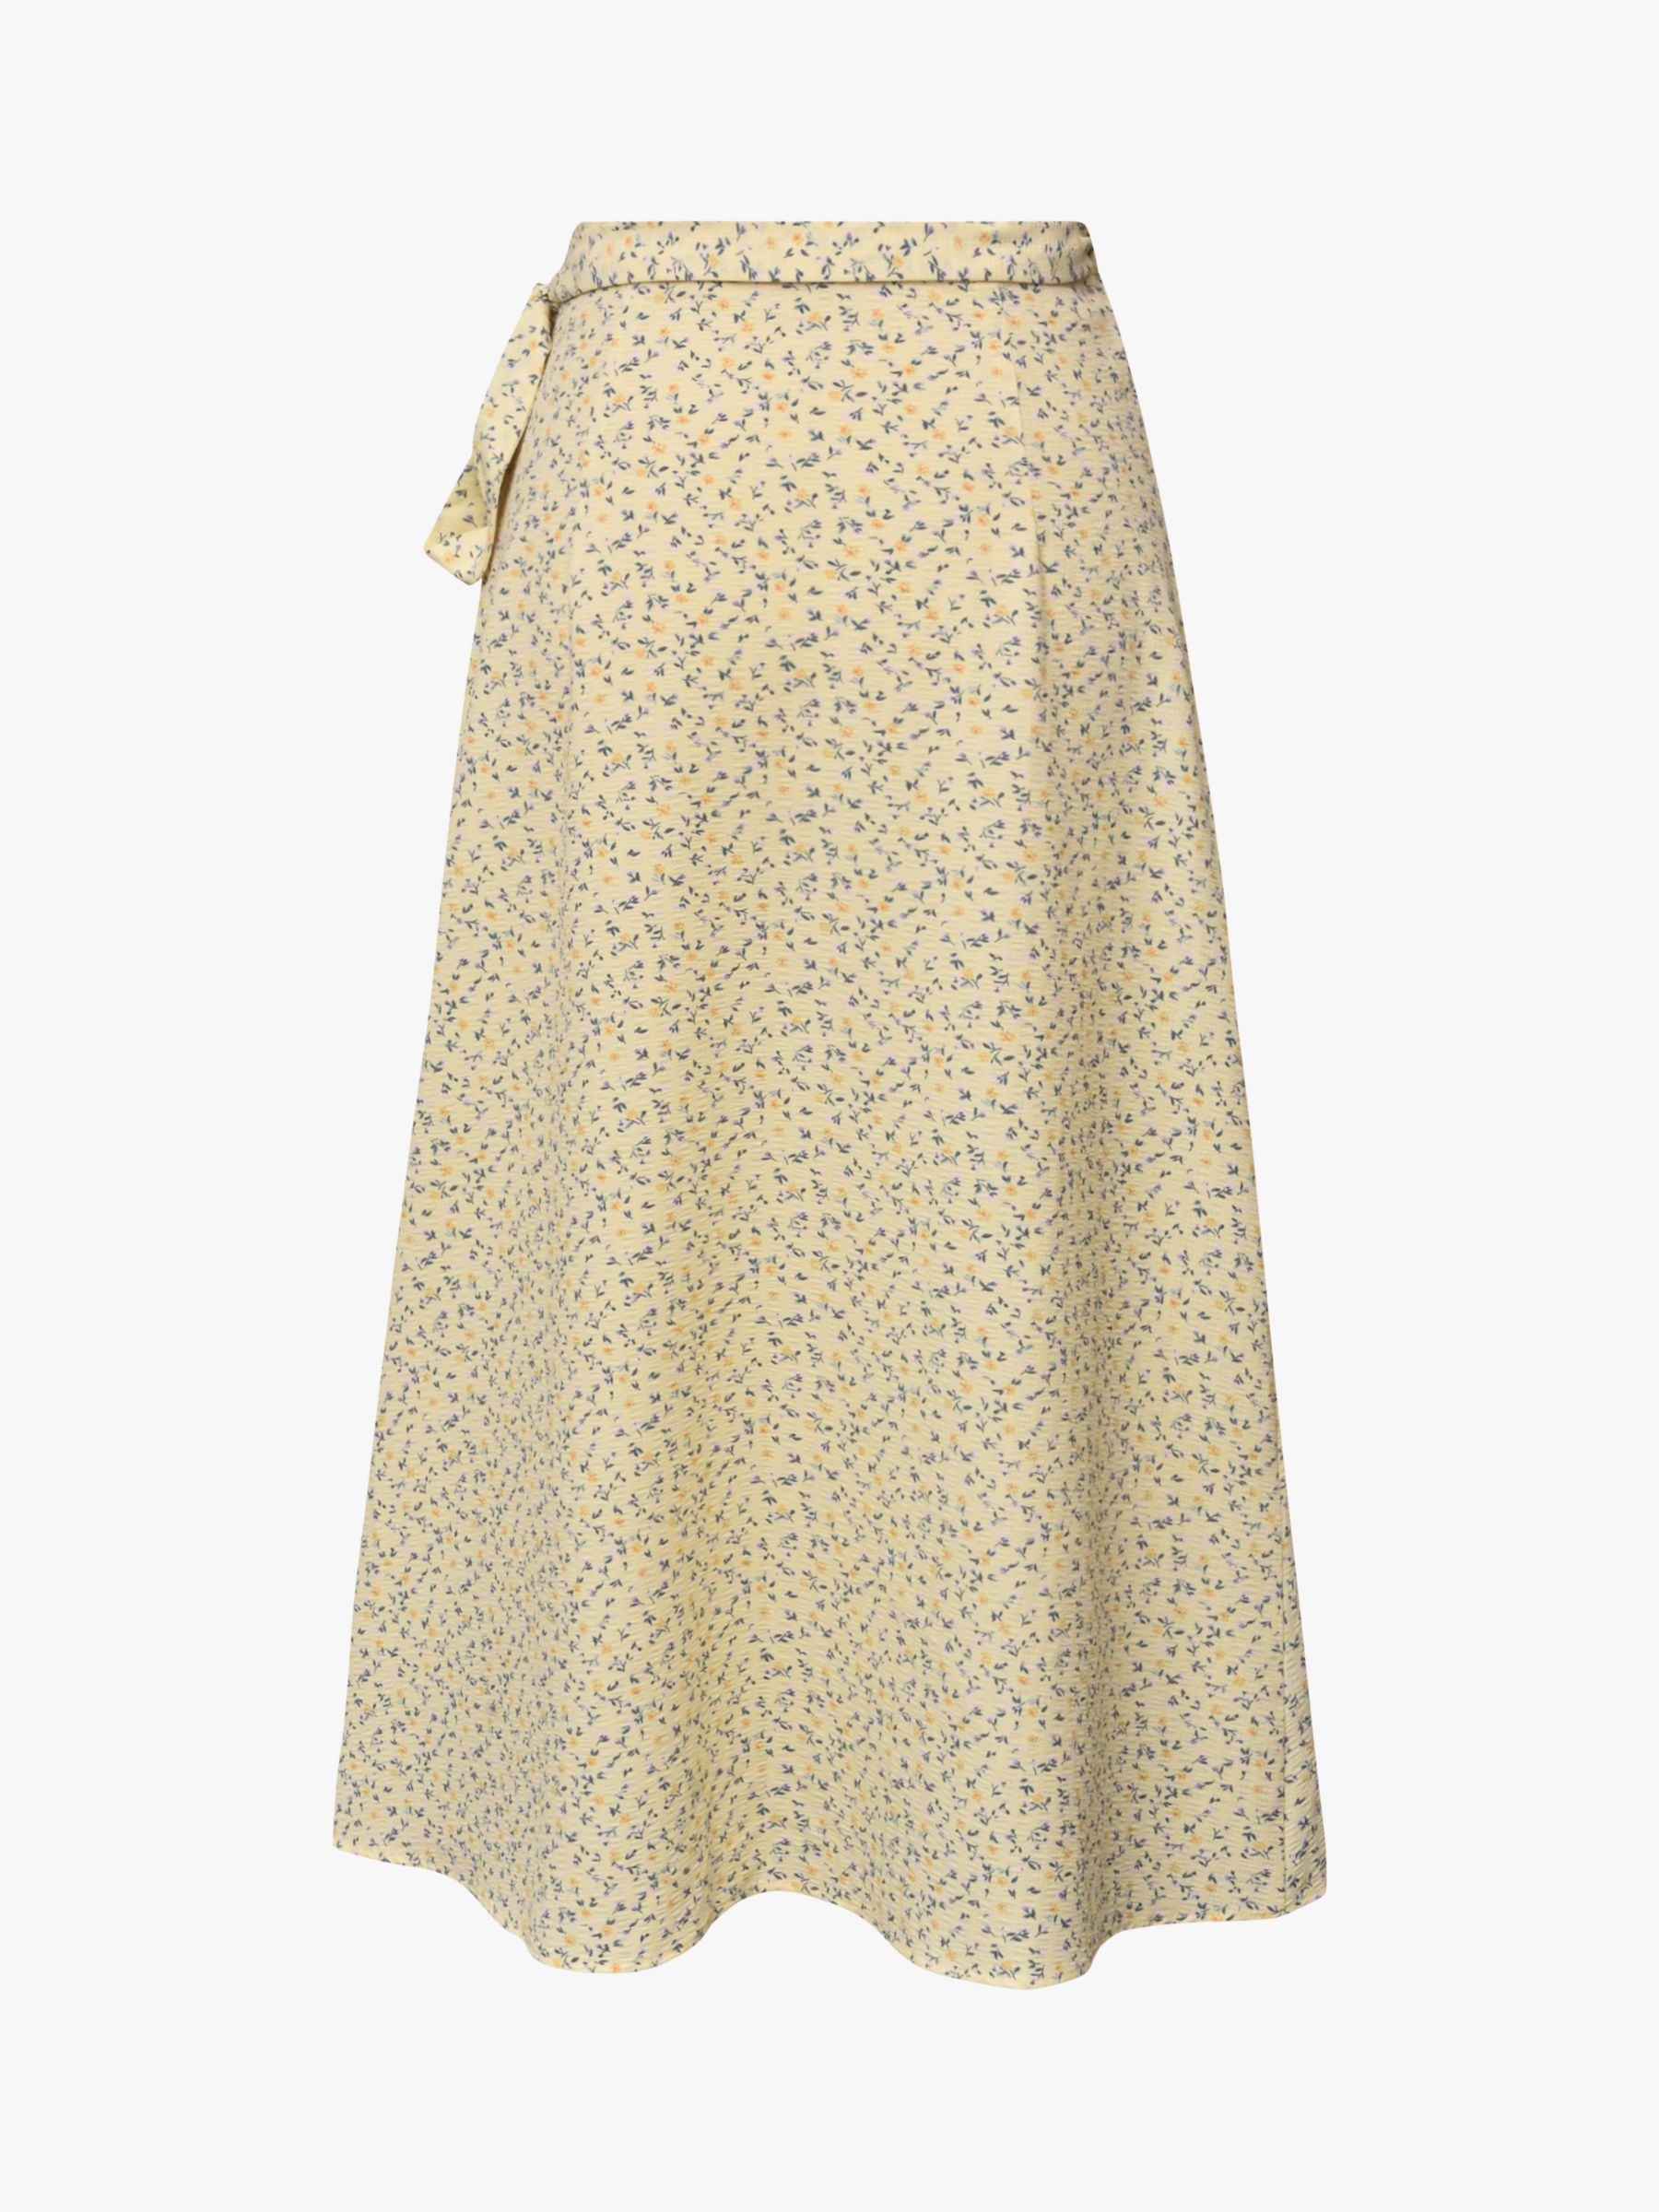 Buy A-VIEW Peony Wrap Midi Skirt, Light Yellow Online at johnlewis.com